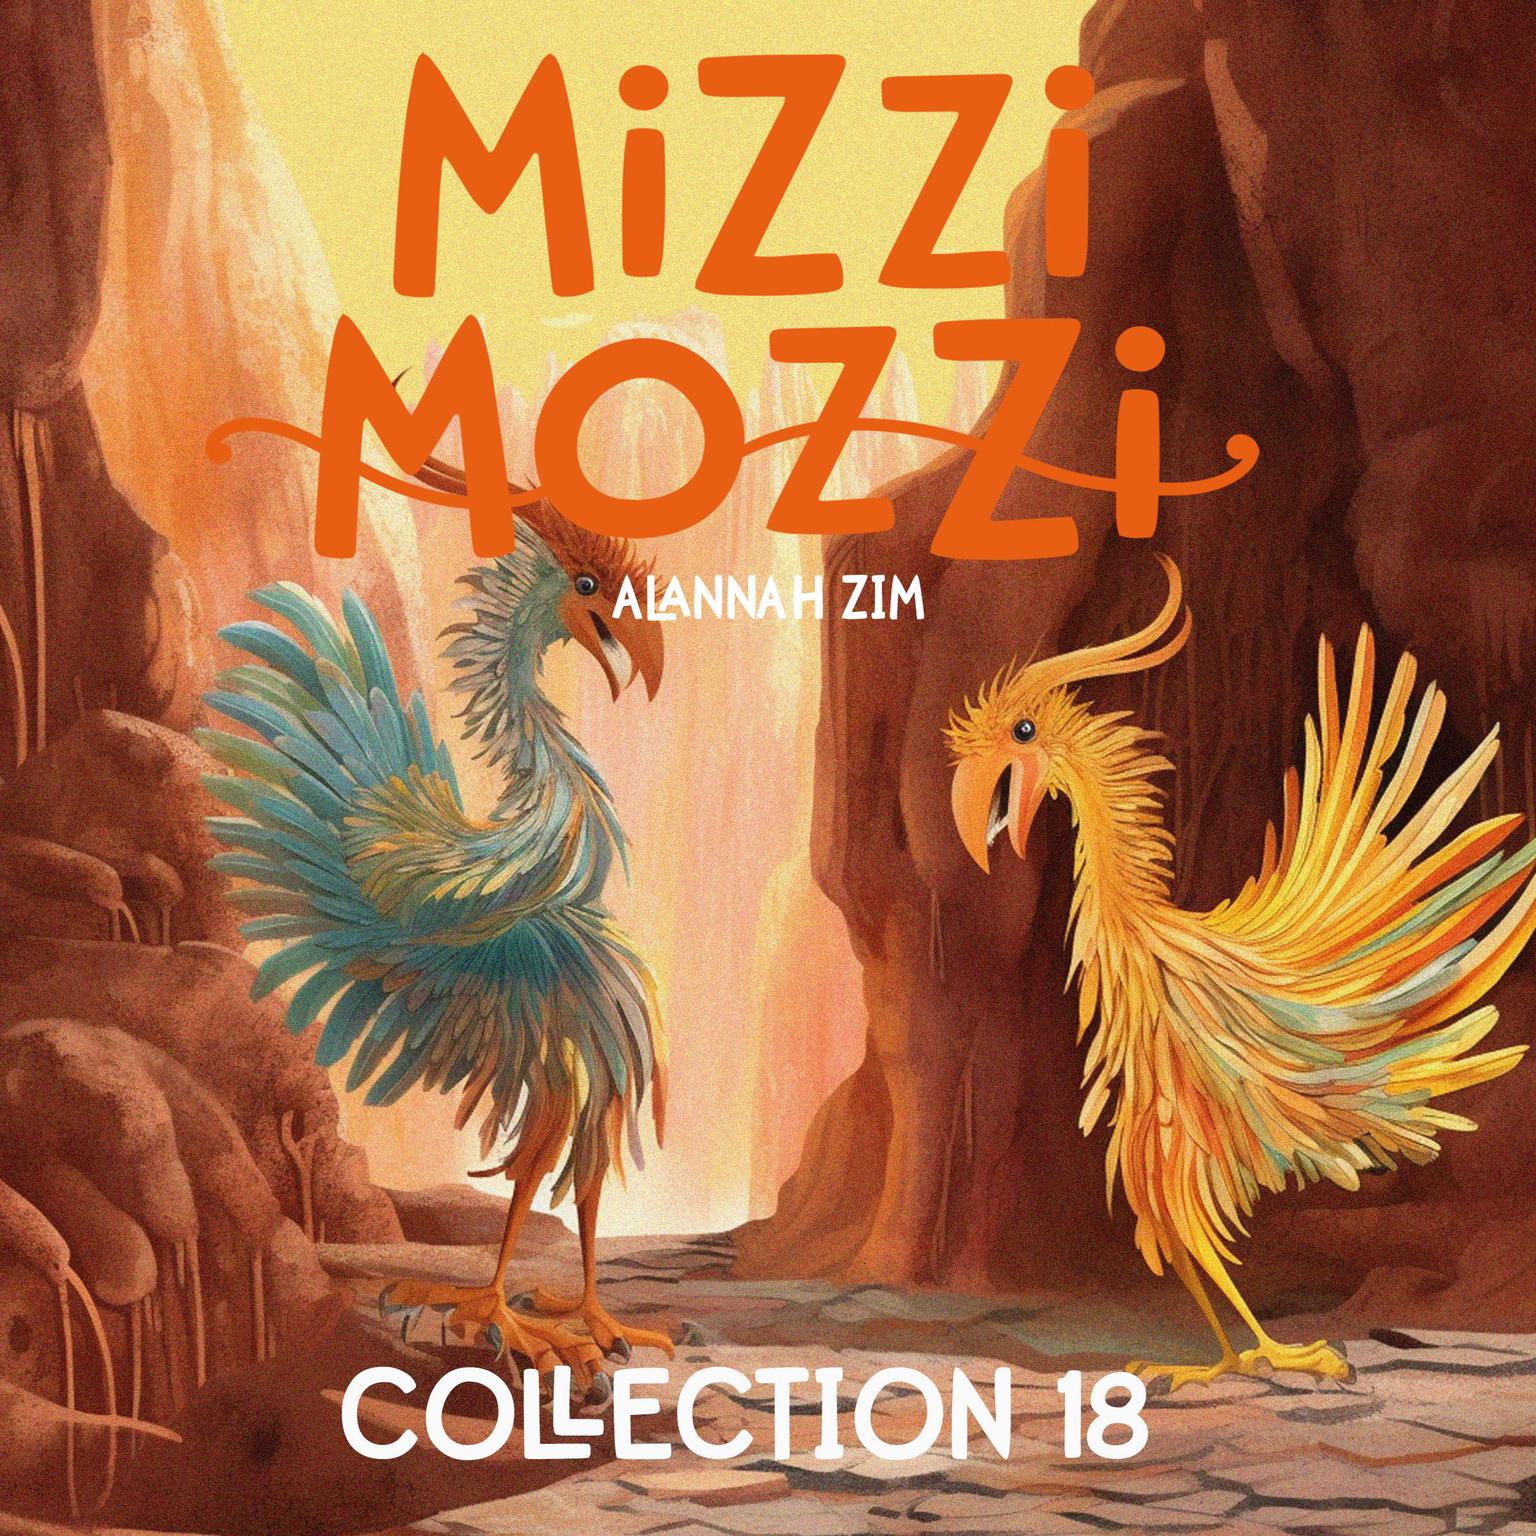 Mizzi Mozzi - An Enchanting Collection of 3 Books: Collection Eighteen Audiobook, by Alannah Zim